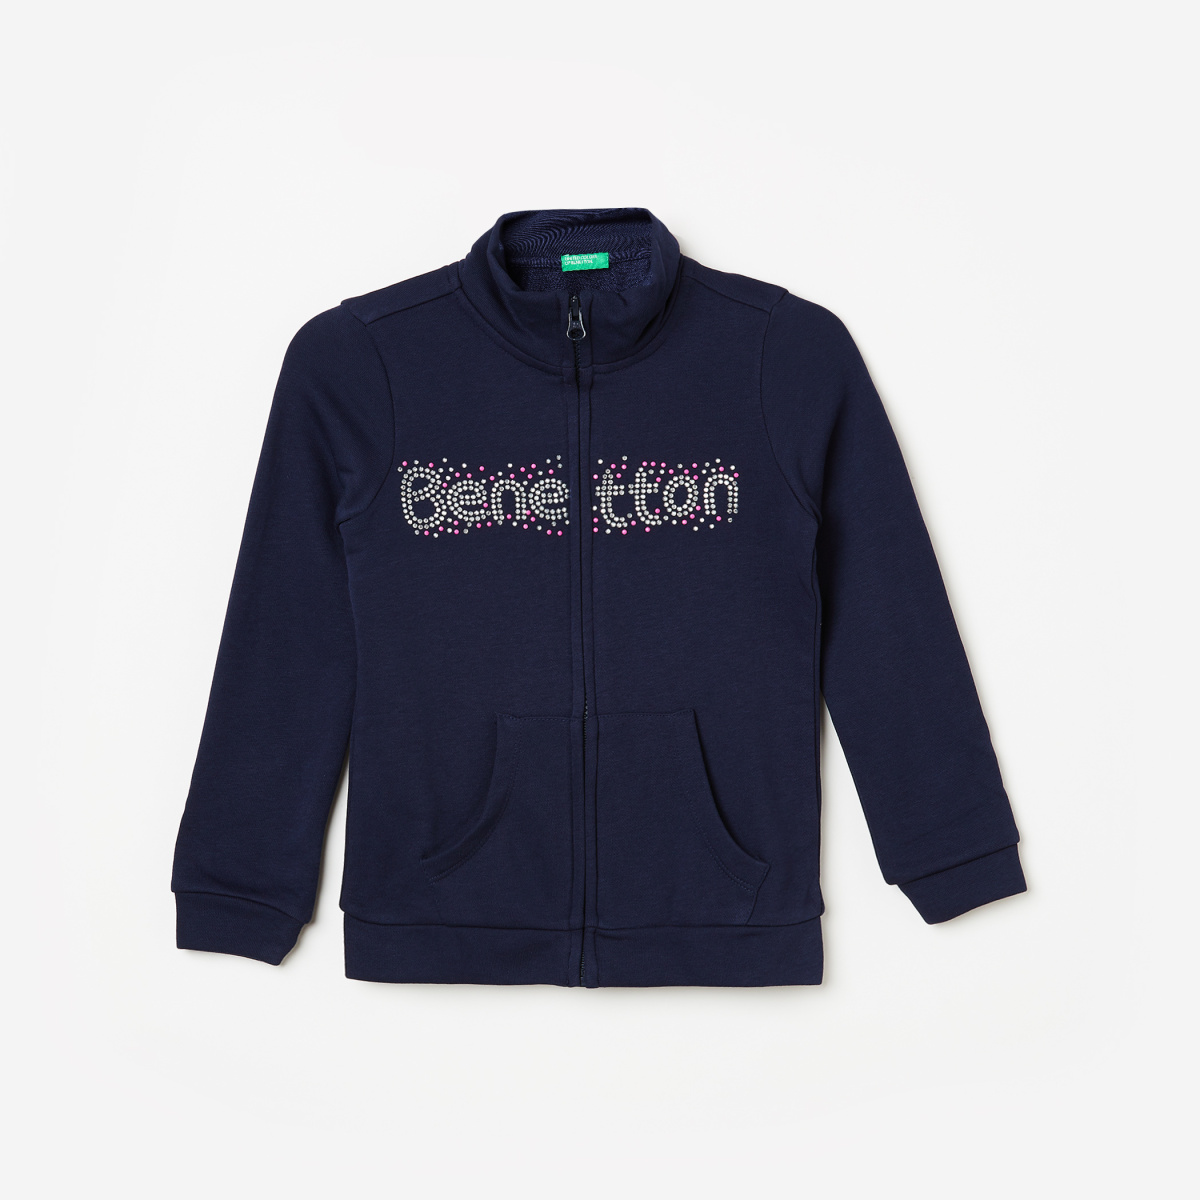 UNITED COLORS OF BENETTON Girls Embellished Zip-Front Hoodie